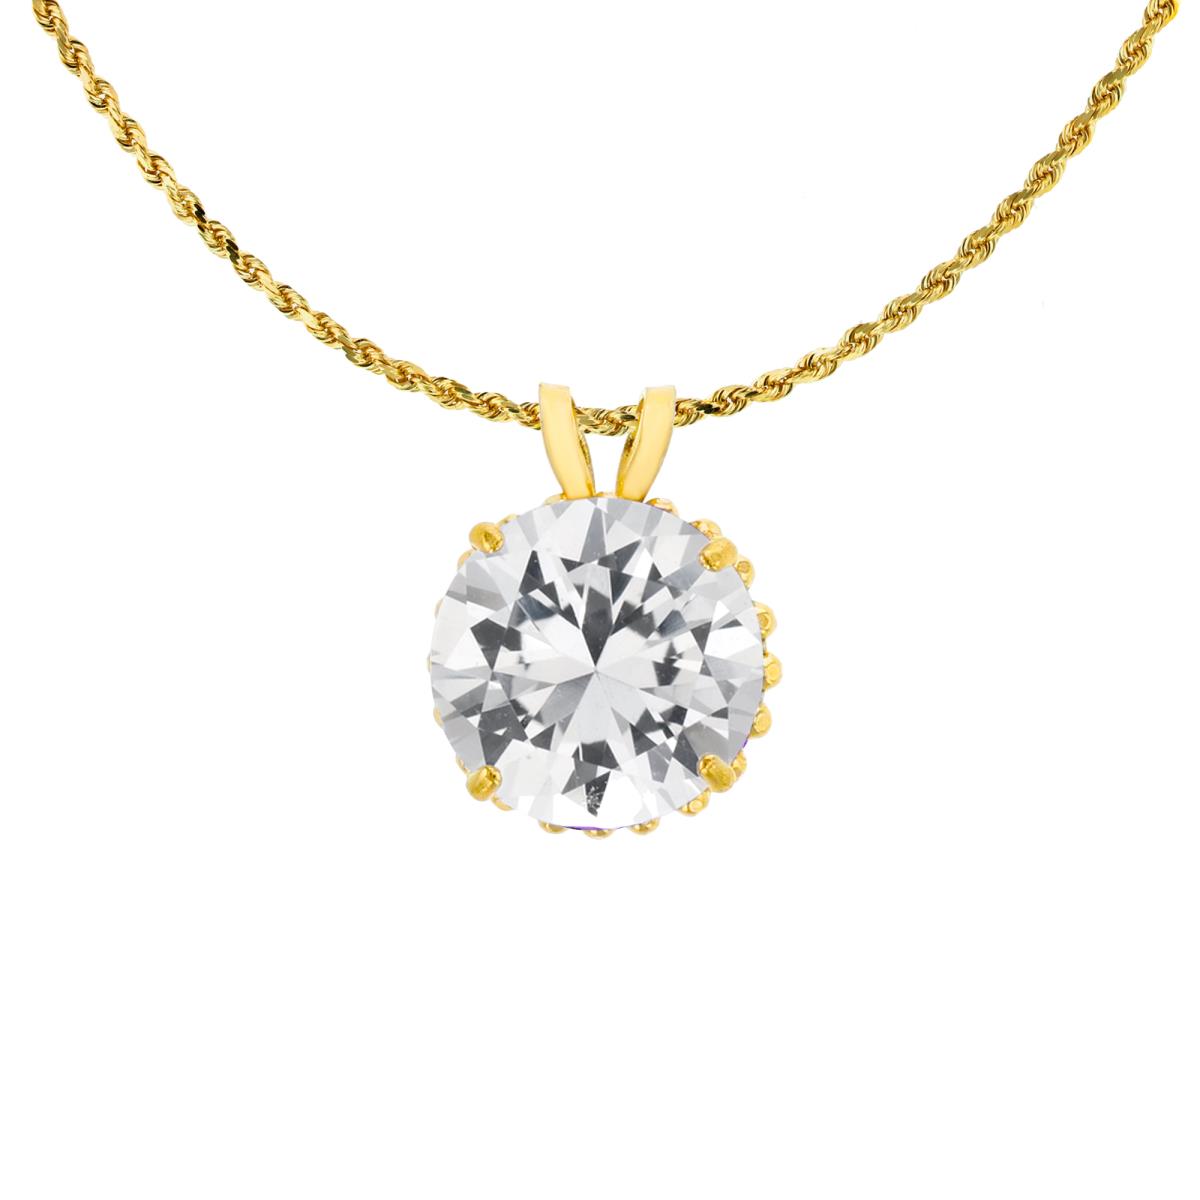 10K Yellow Gold 7mm Rd Cut Created White Sapphire with Bead Frame Rabbit Ear 18" Rope Chain Necklace